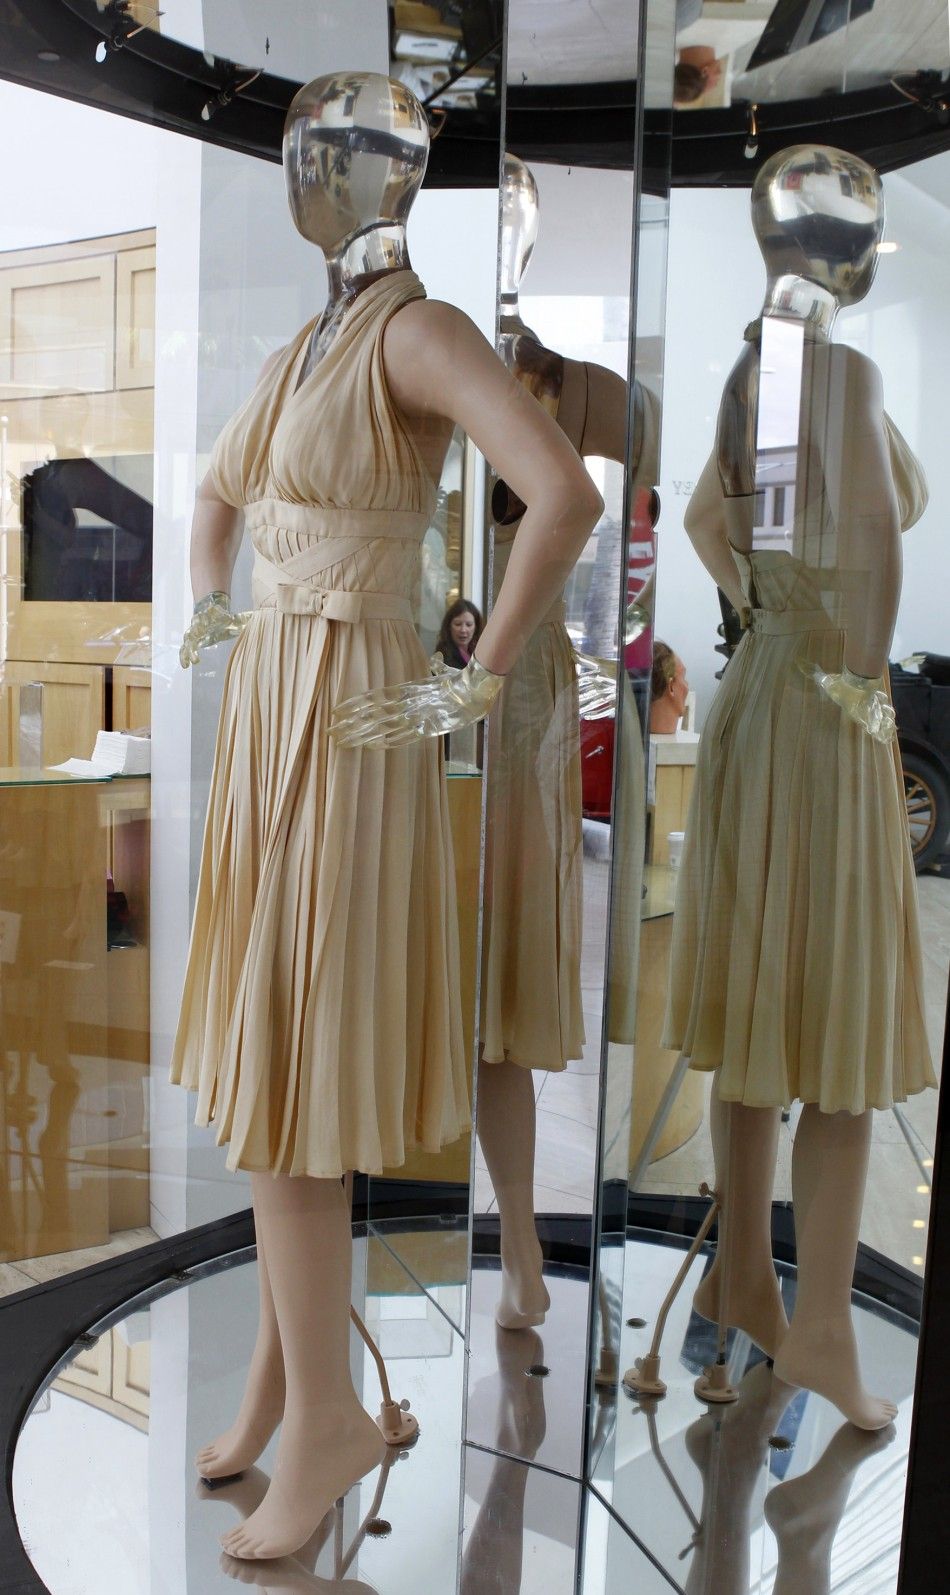 The ivory-pleated Subway dress worn by actress Marilyn Monroe from the 1955 film The Seven Year Itch